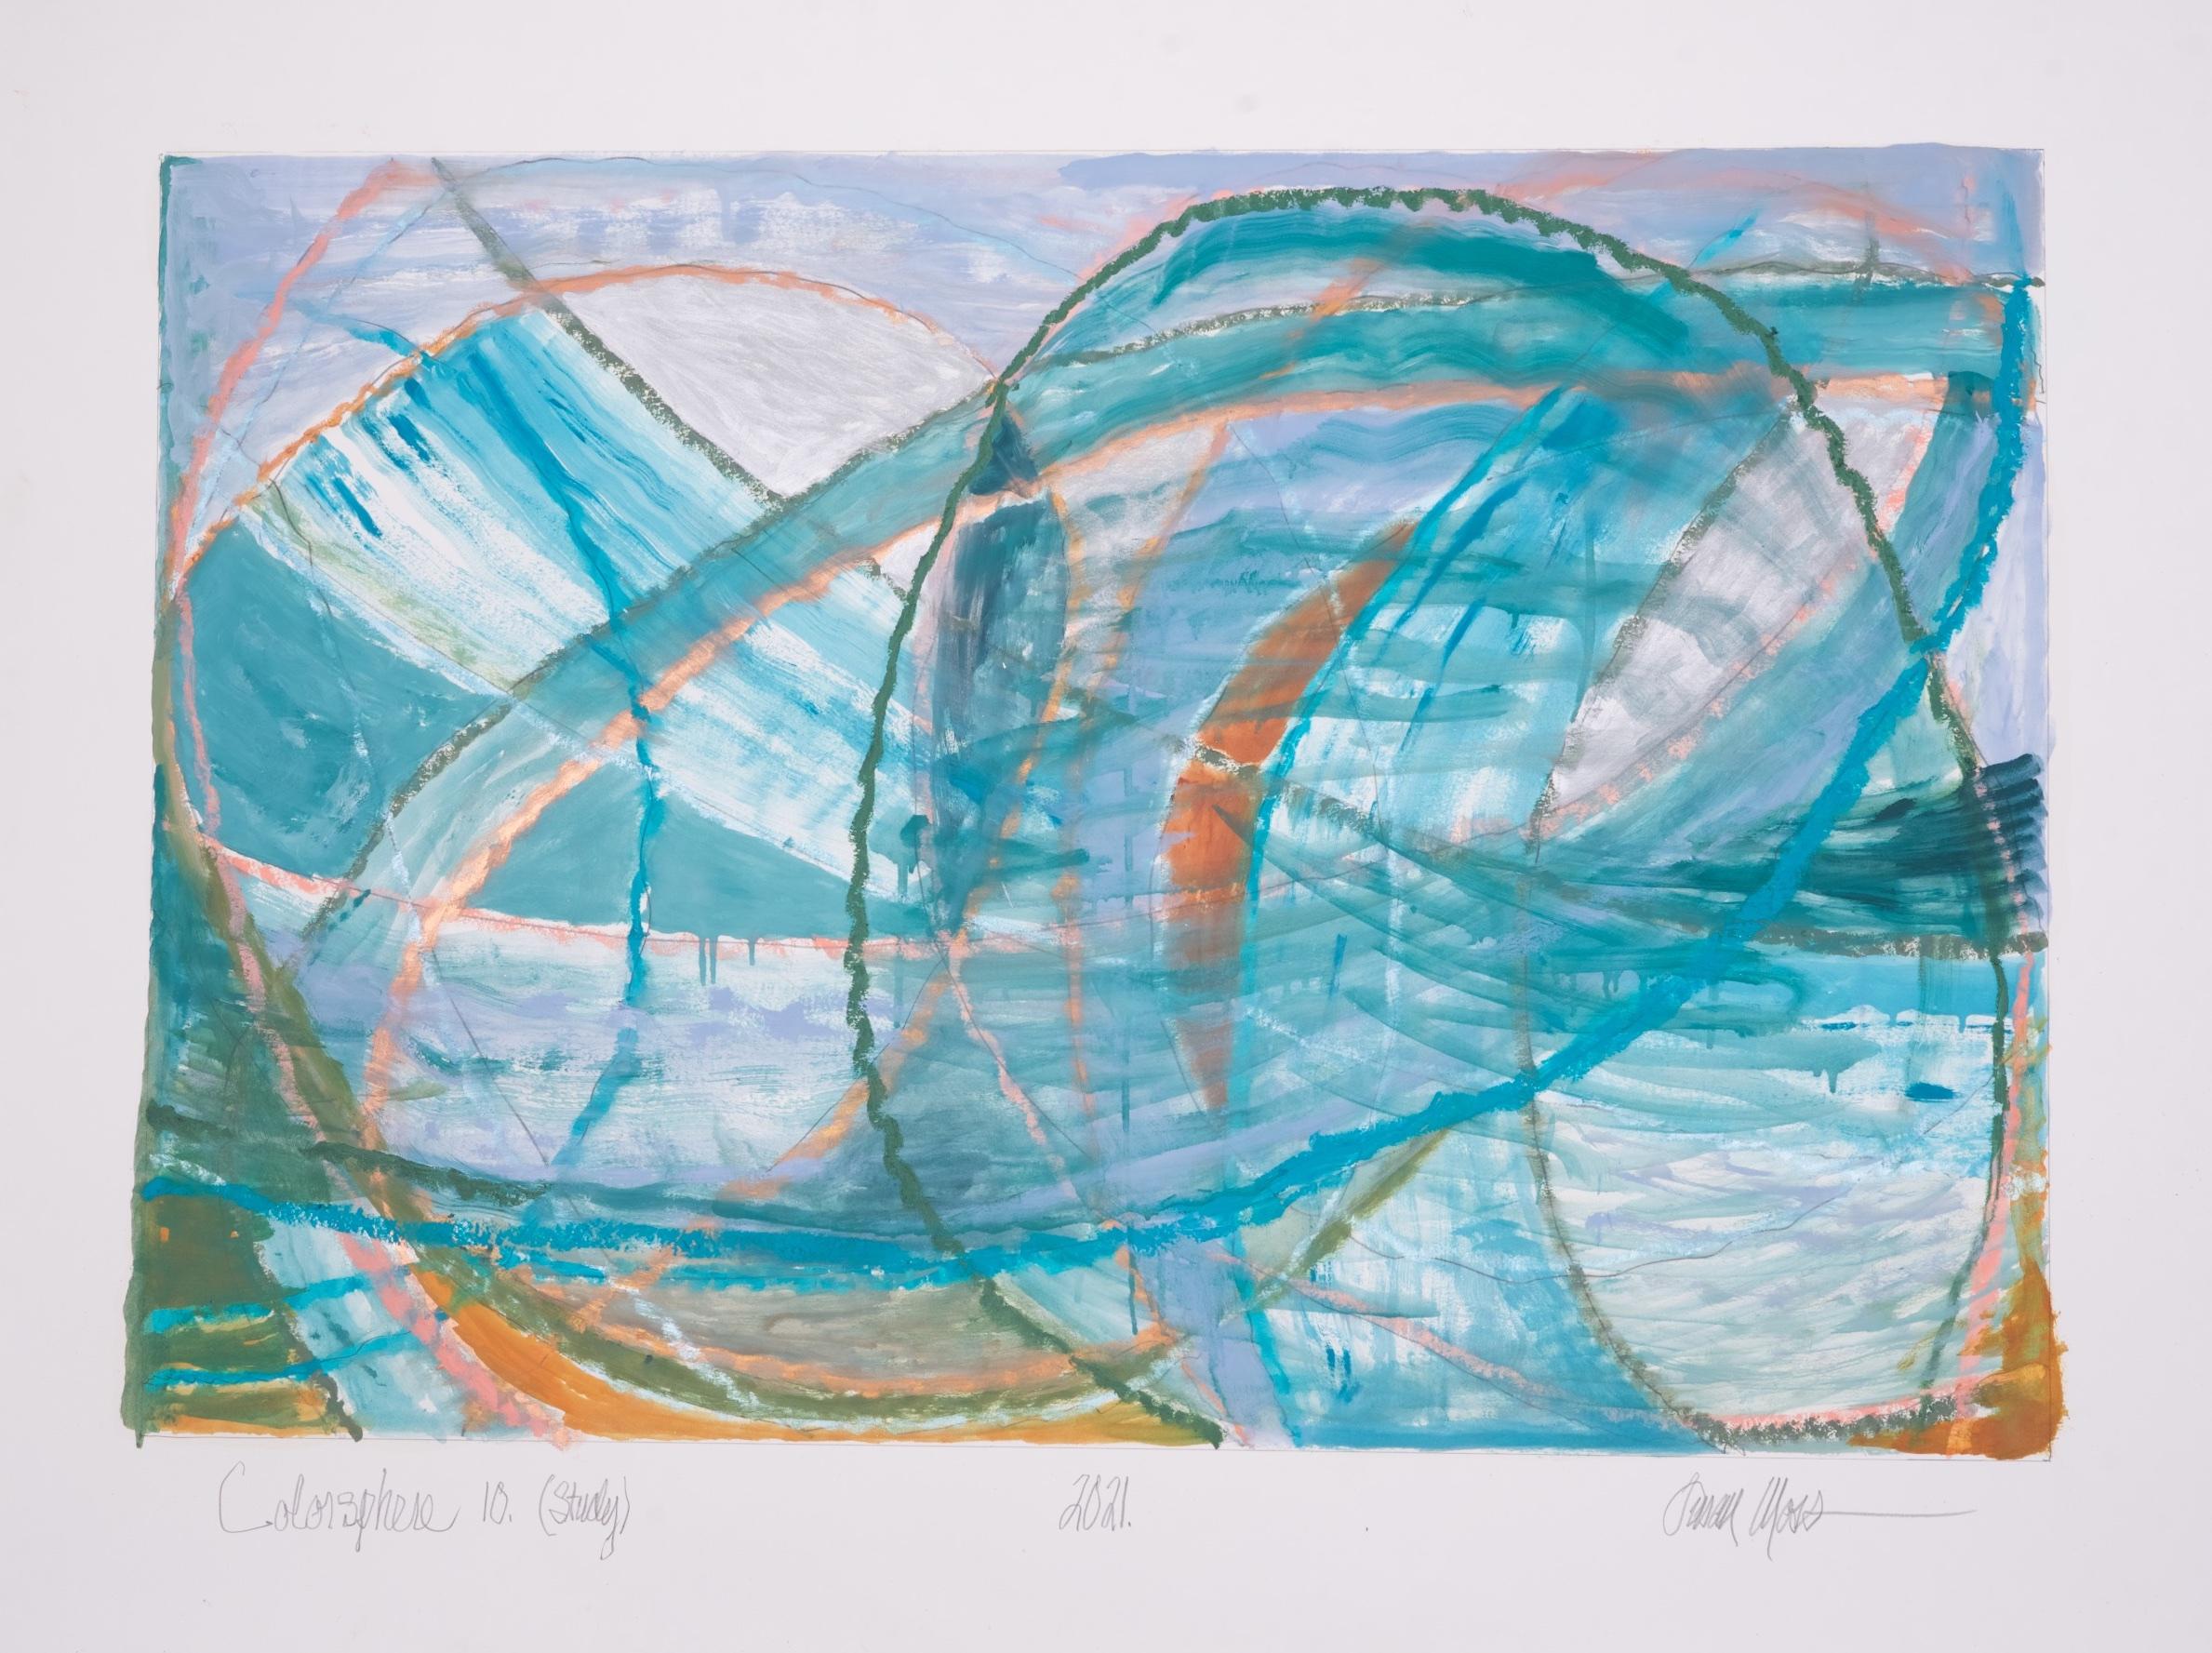 Susan Moss Abstract Drawing - Colorsphere 10 (Study)